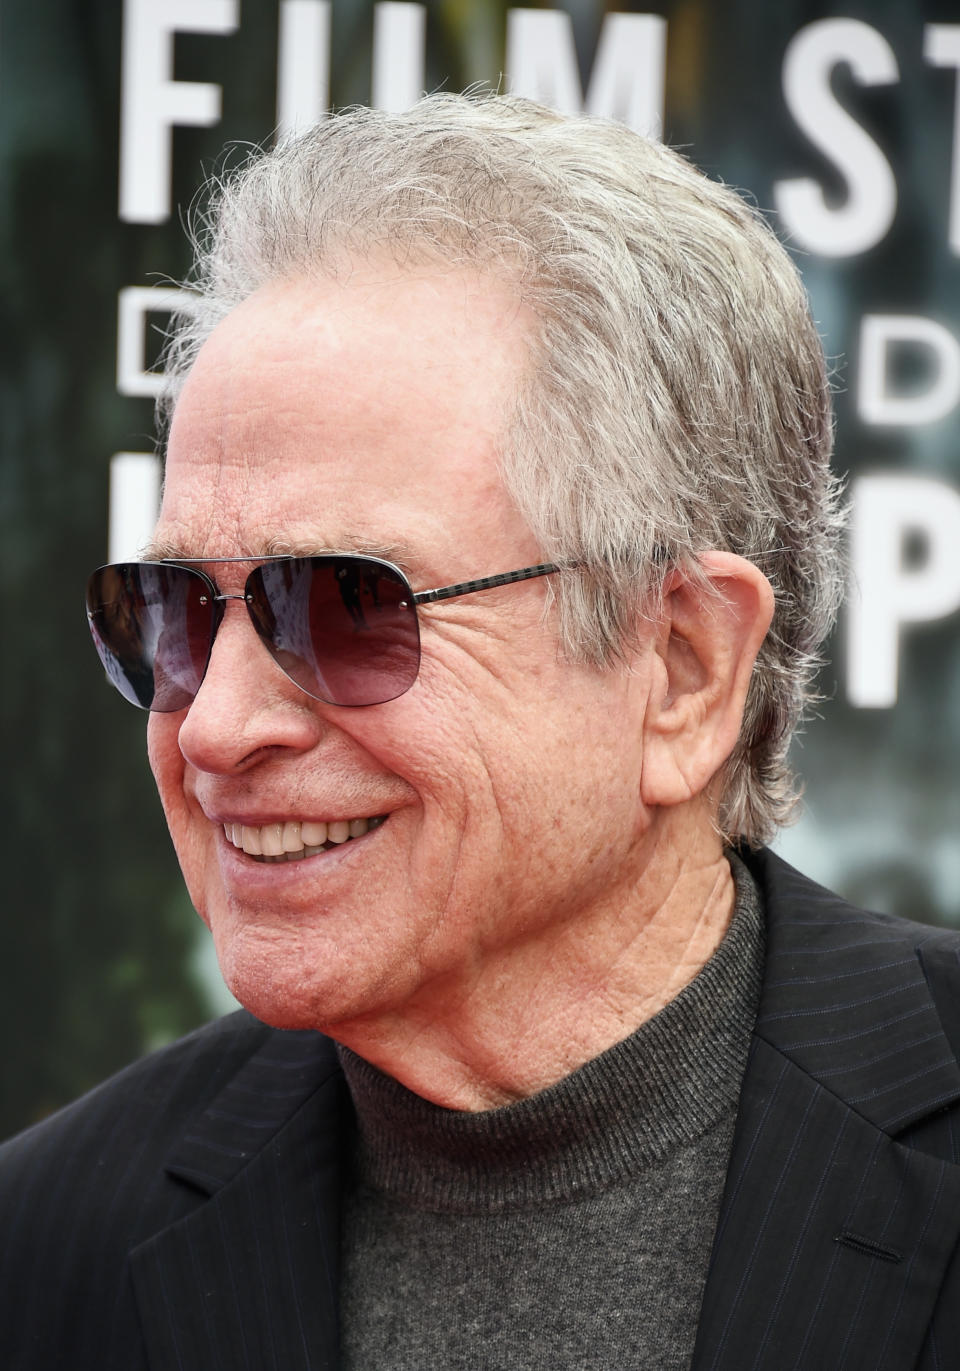 Actor Warren Beatty arrives at the AFI FEST 2017 Presented By Audi screening of "Film Stars Don't Die In Liverpool" at the TCL Chinese Theatre on November 12, 2017